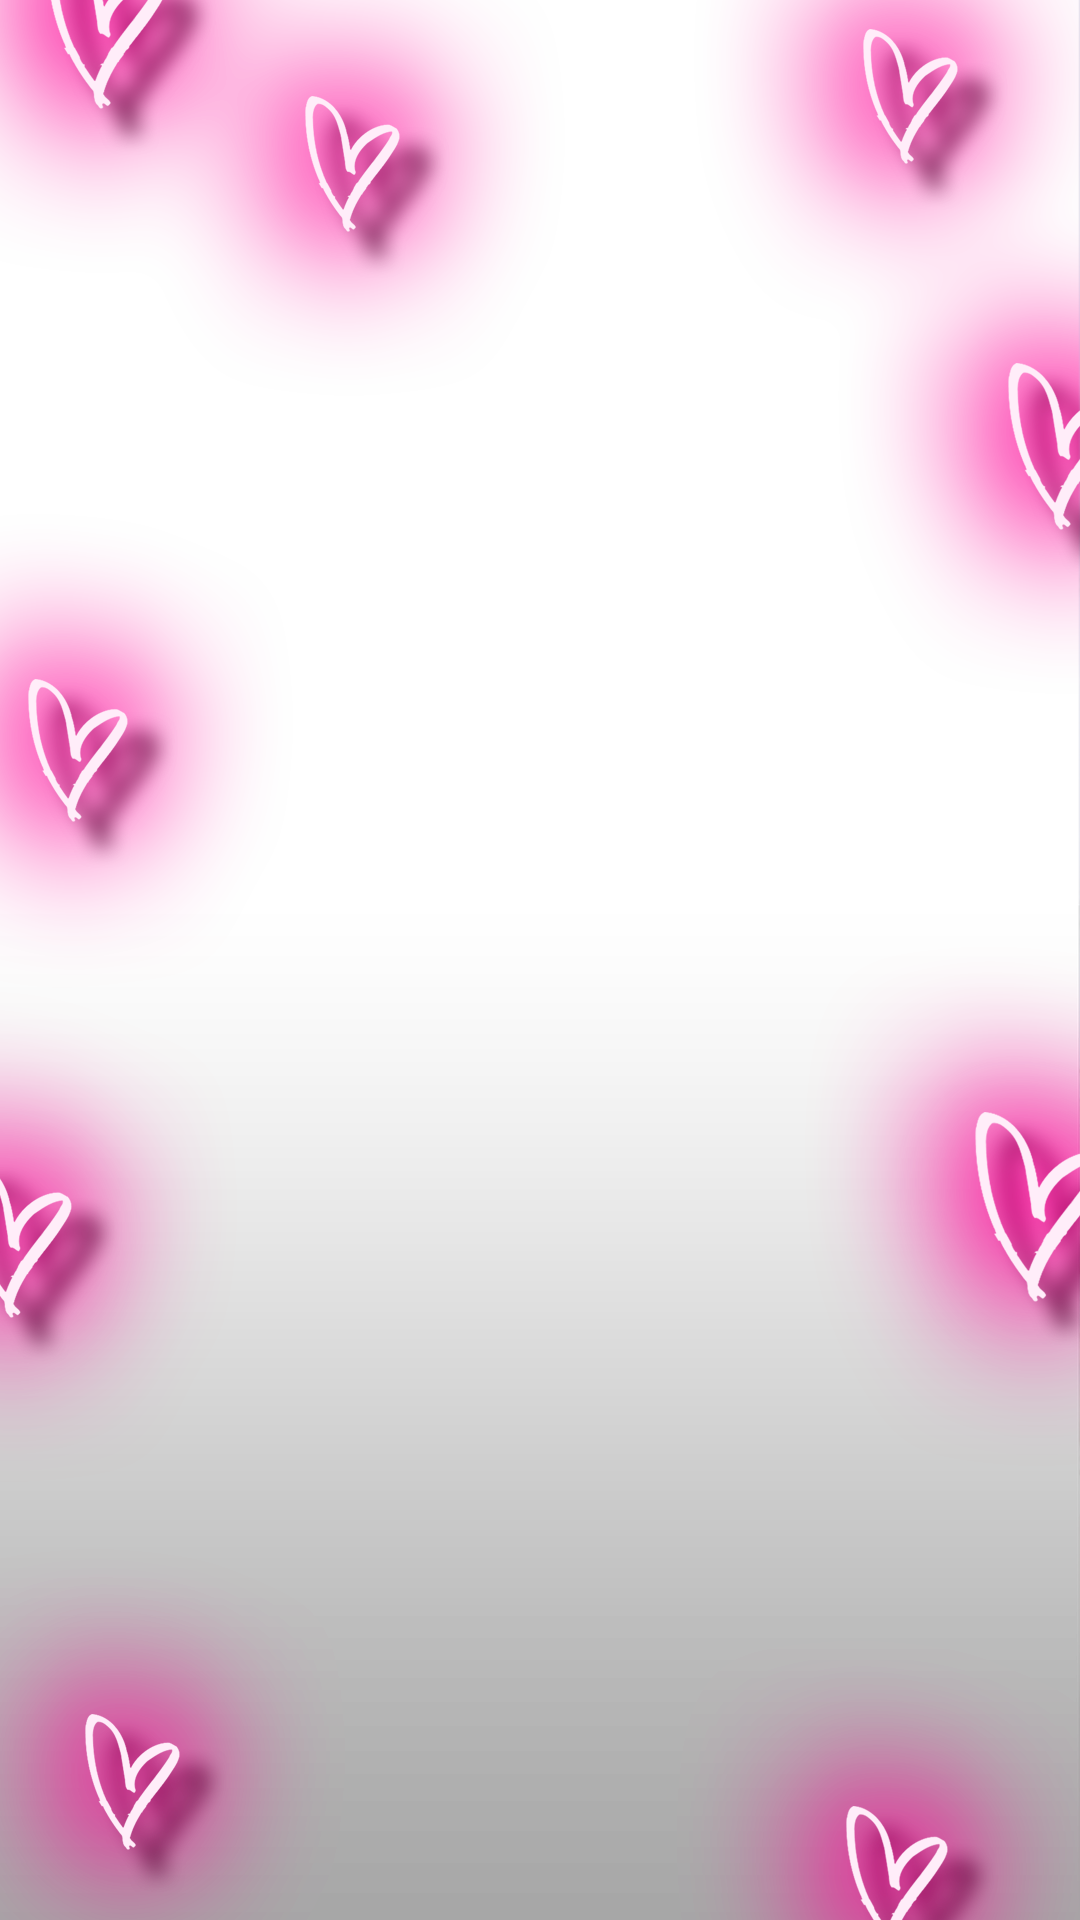 Neon Hearts - Snapchat Heart Filter Png (1080x1920), Png Download